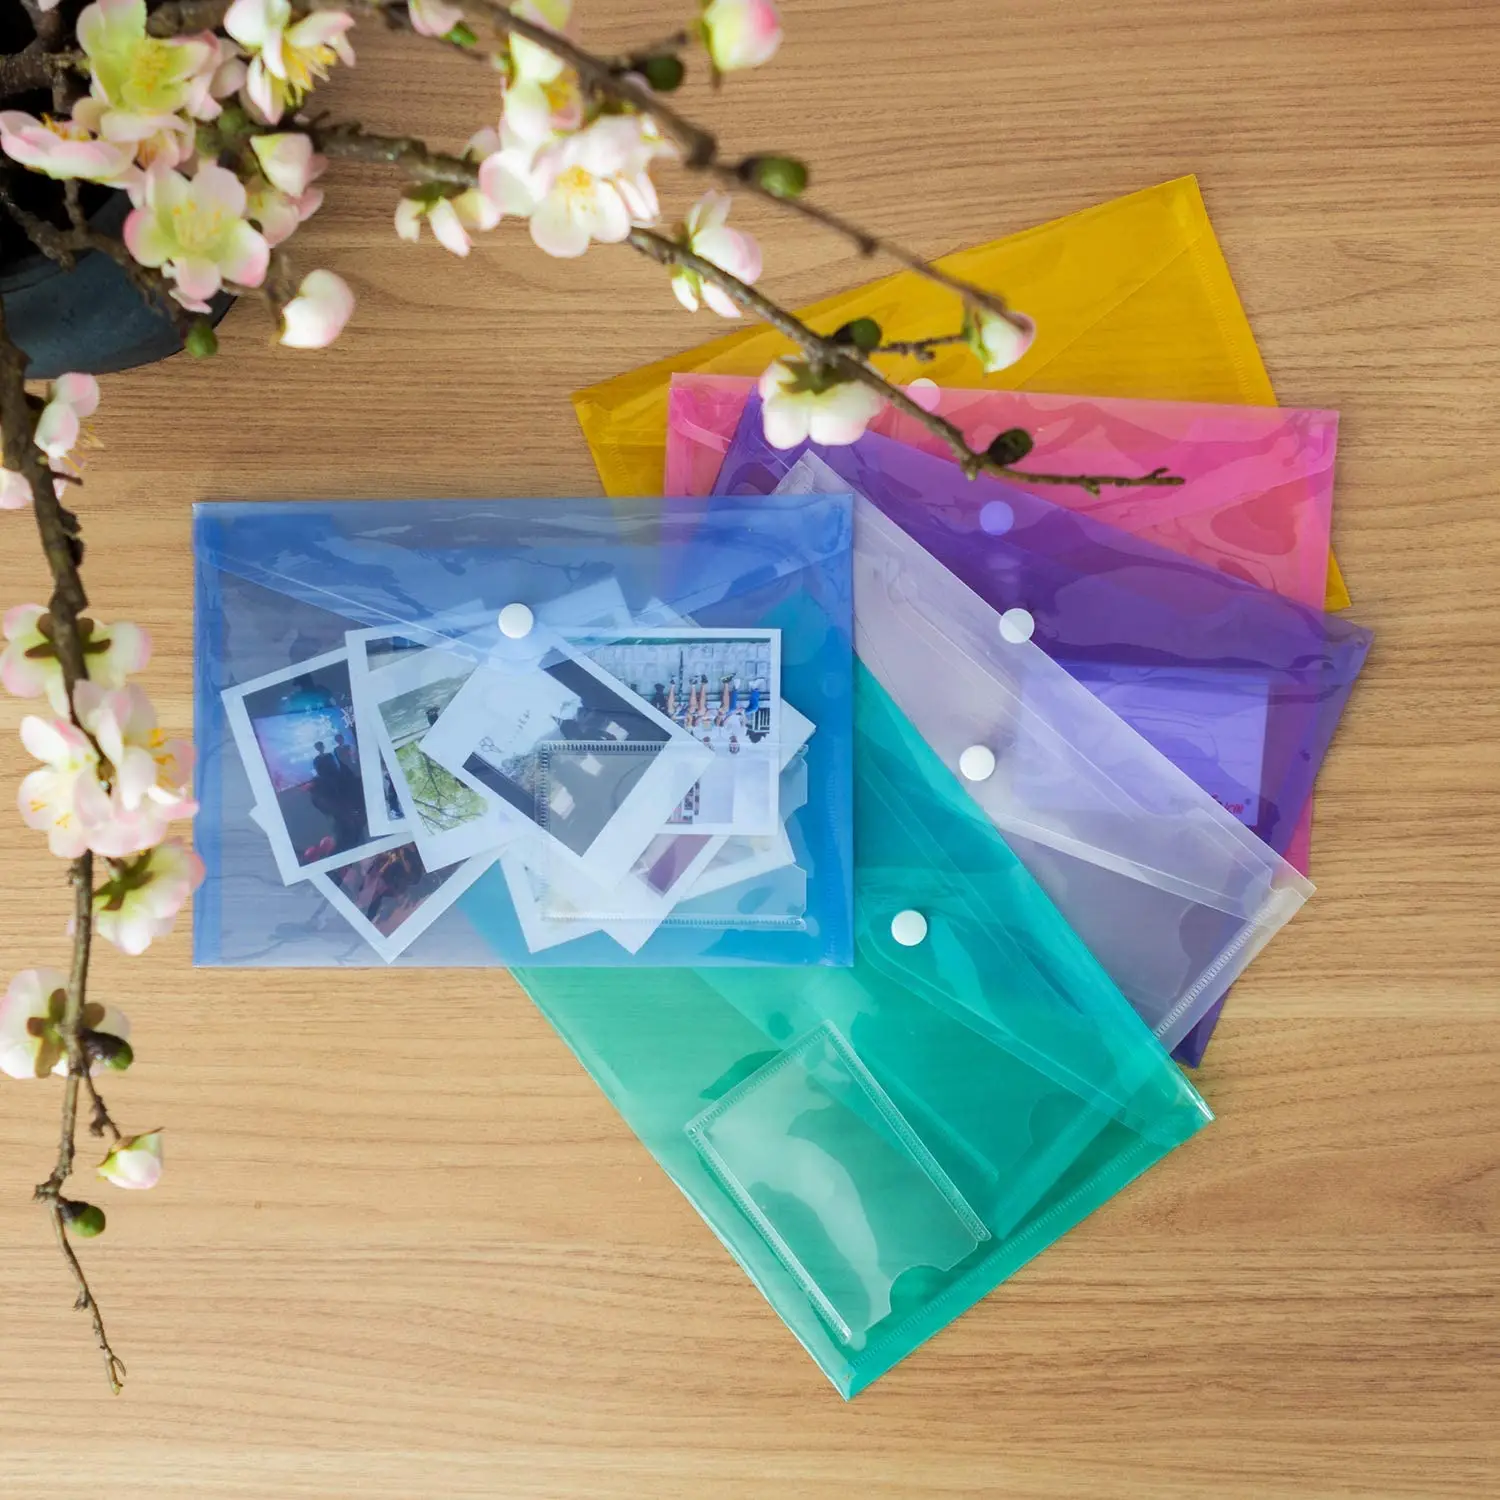 5PCS A5 Poly Envelope Folder with Snap Button Clear Waterproof Plastic Document Protector for School Home Office Organization